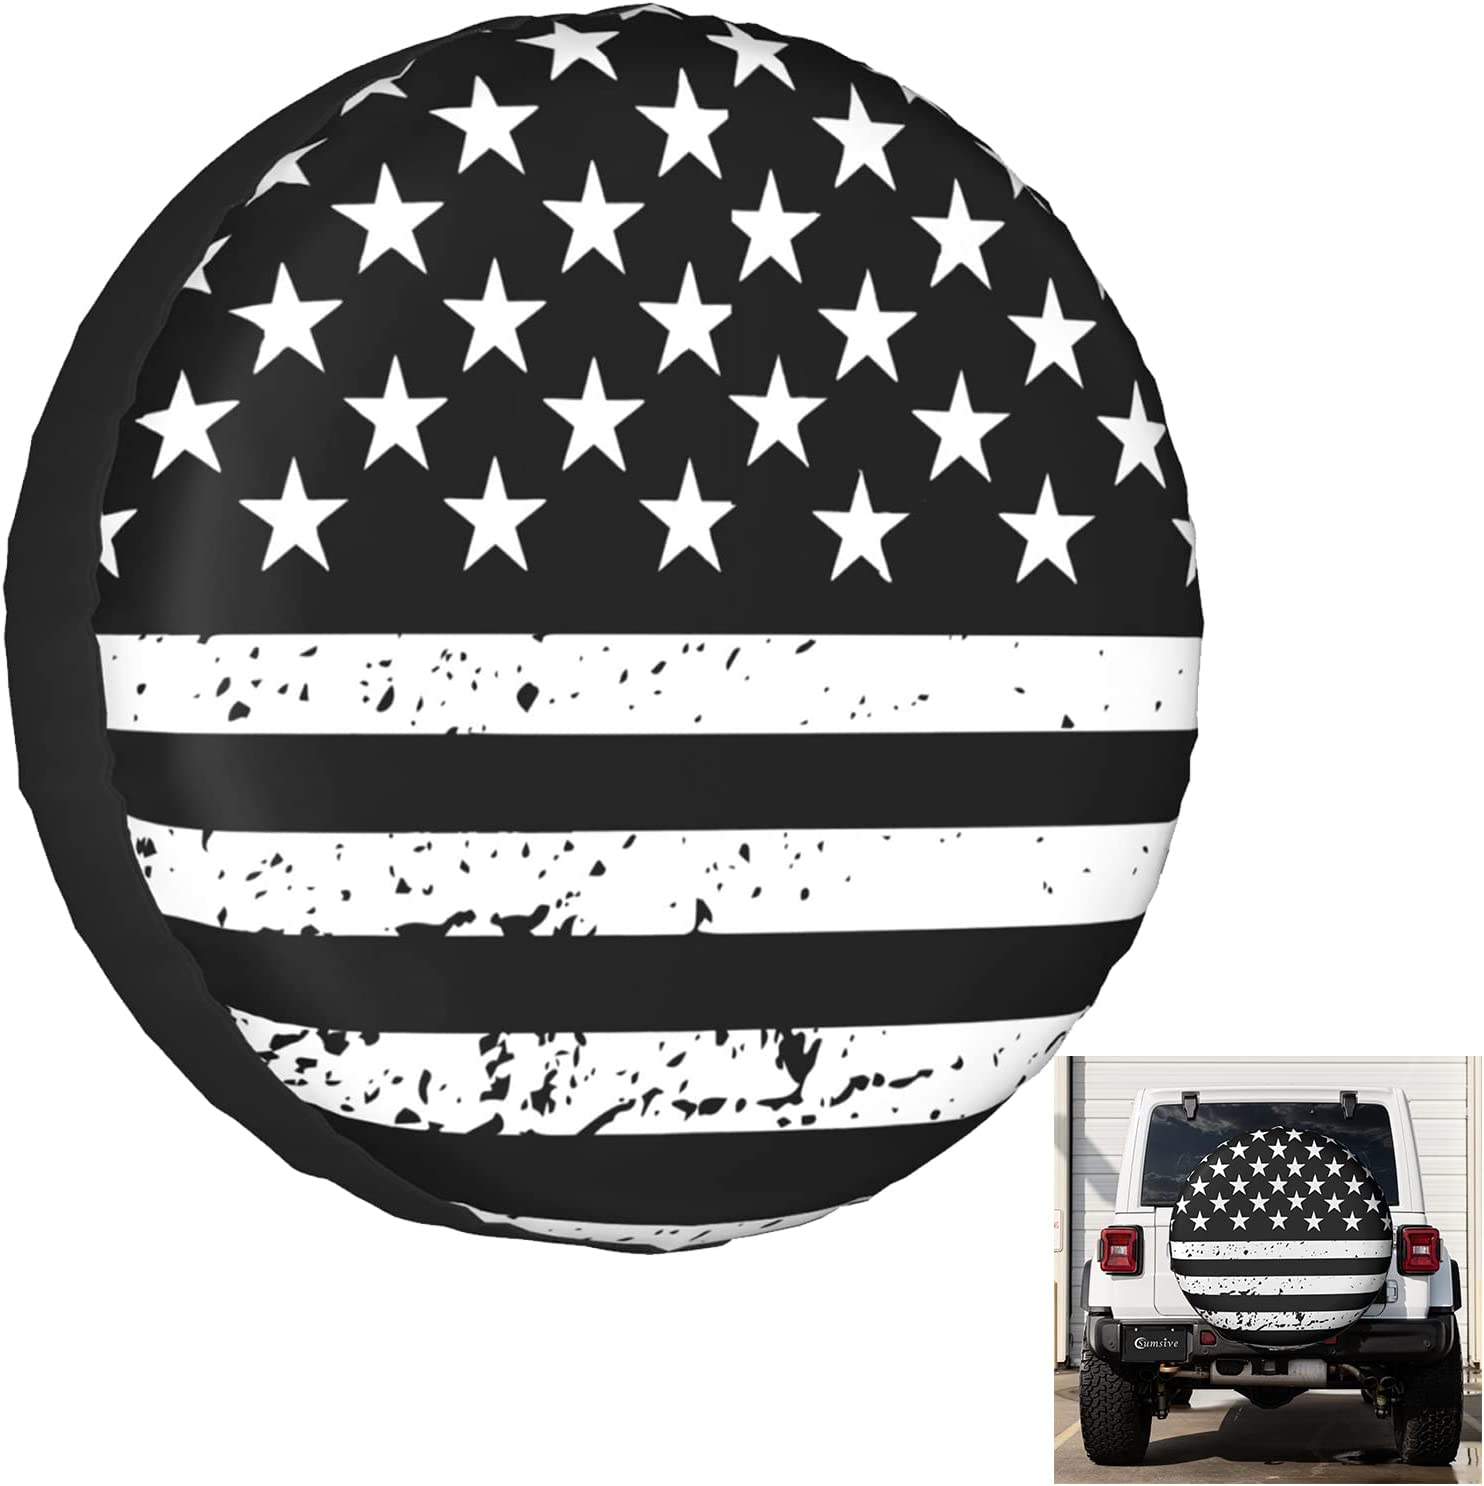 I Hate Pulling Out Spare Tire Cover Wheel Covers for RV Tires Camper Tire  Cover Protectors for Trailer Rv SUV Truck Travel Trailer